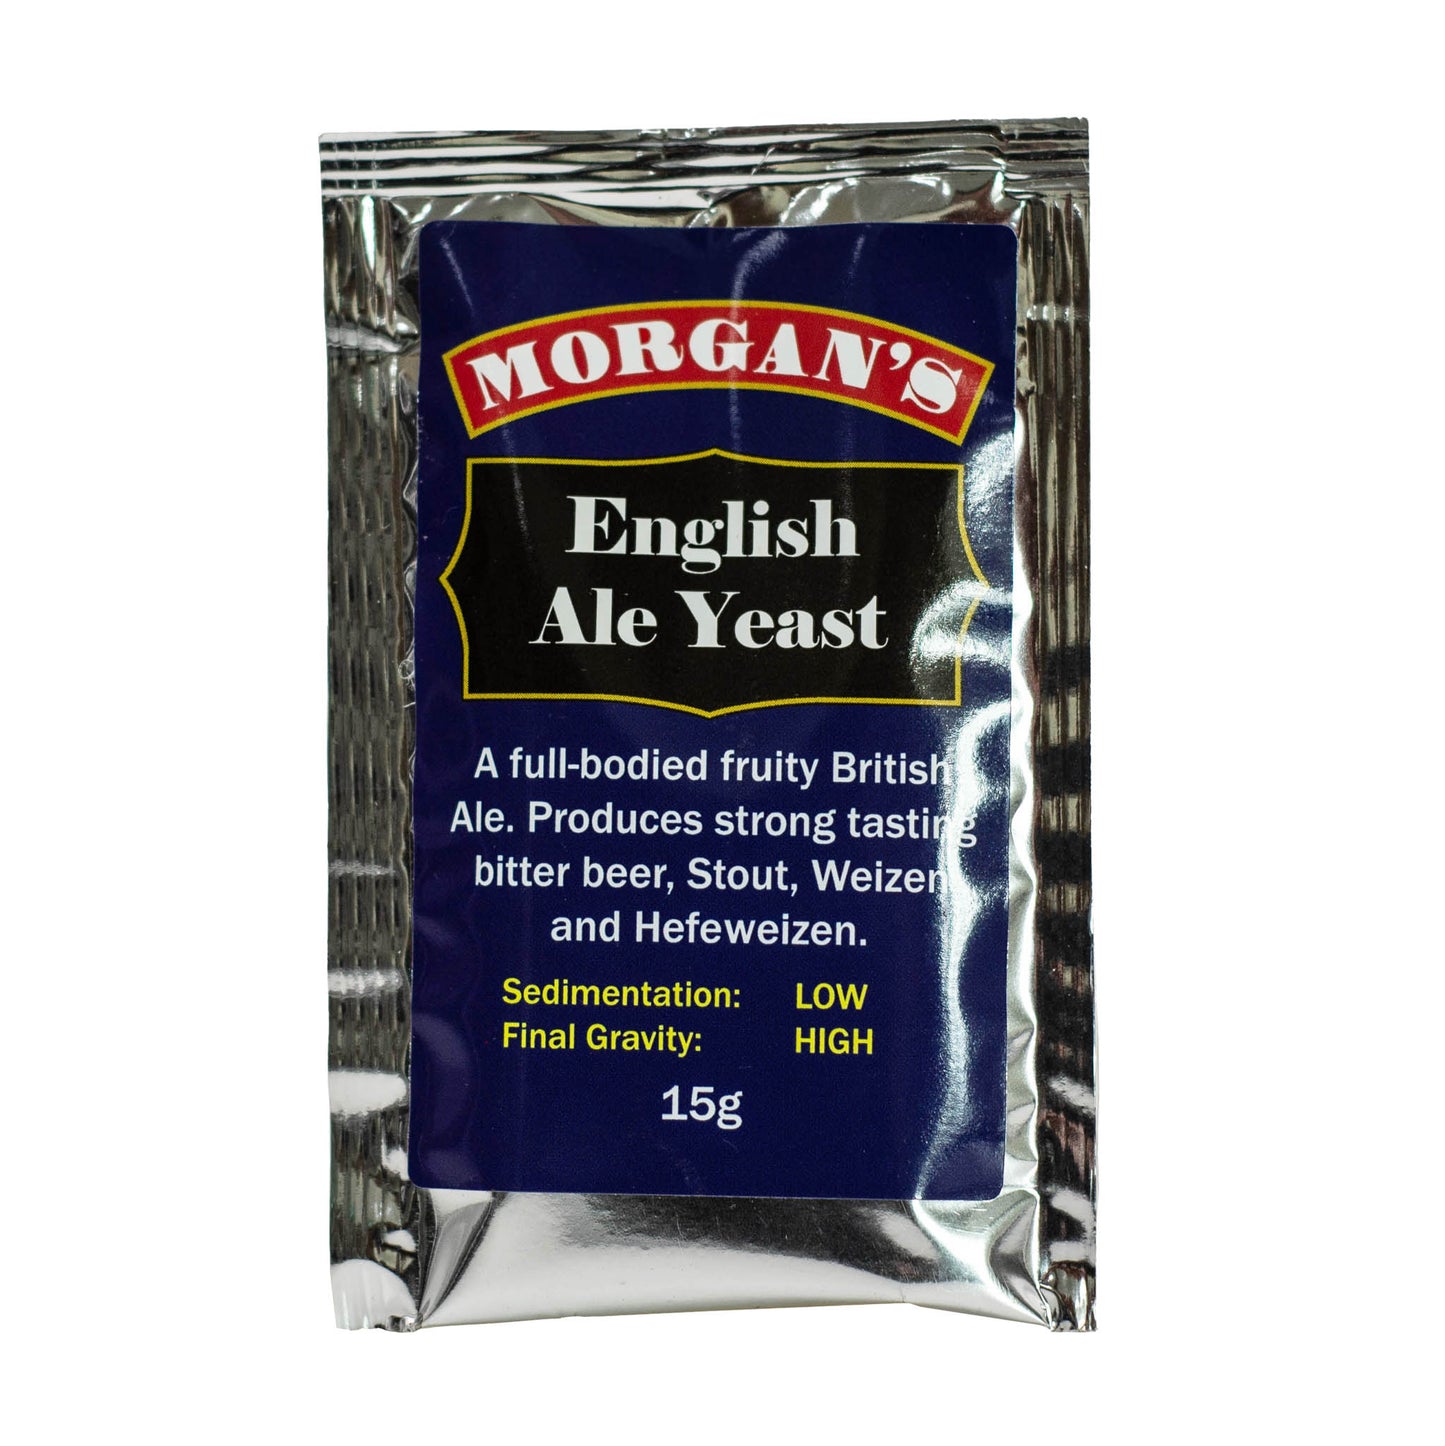 15g packet of Brew Cellar English Ale yeast. 